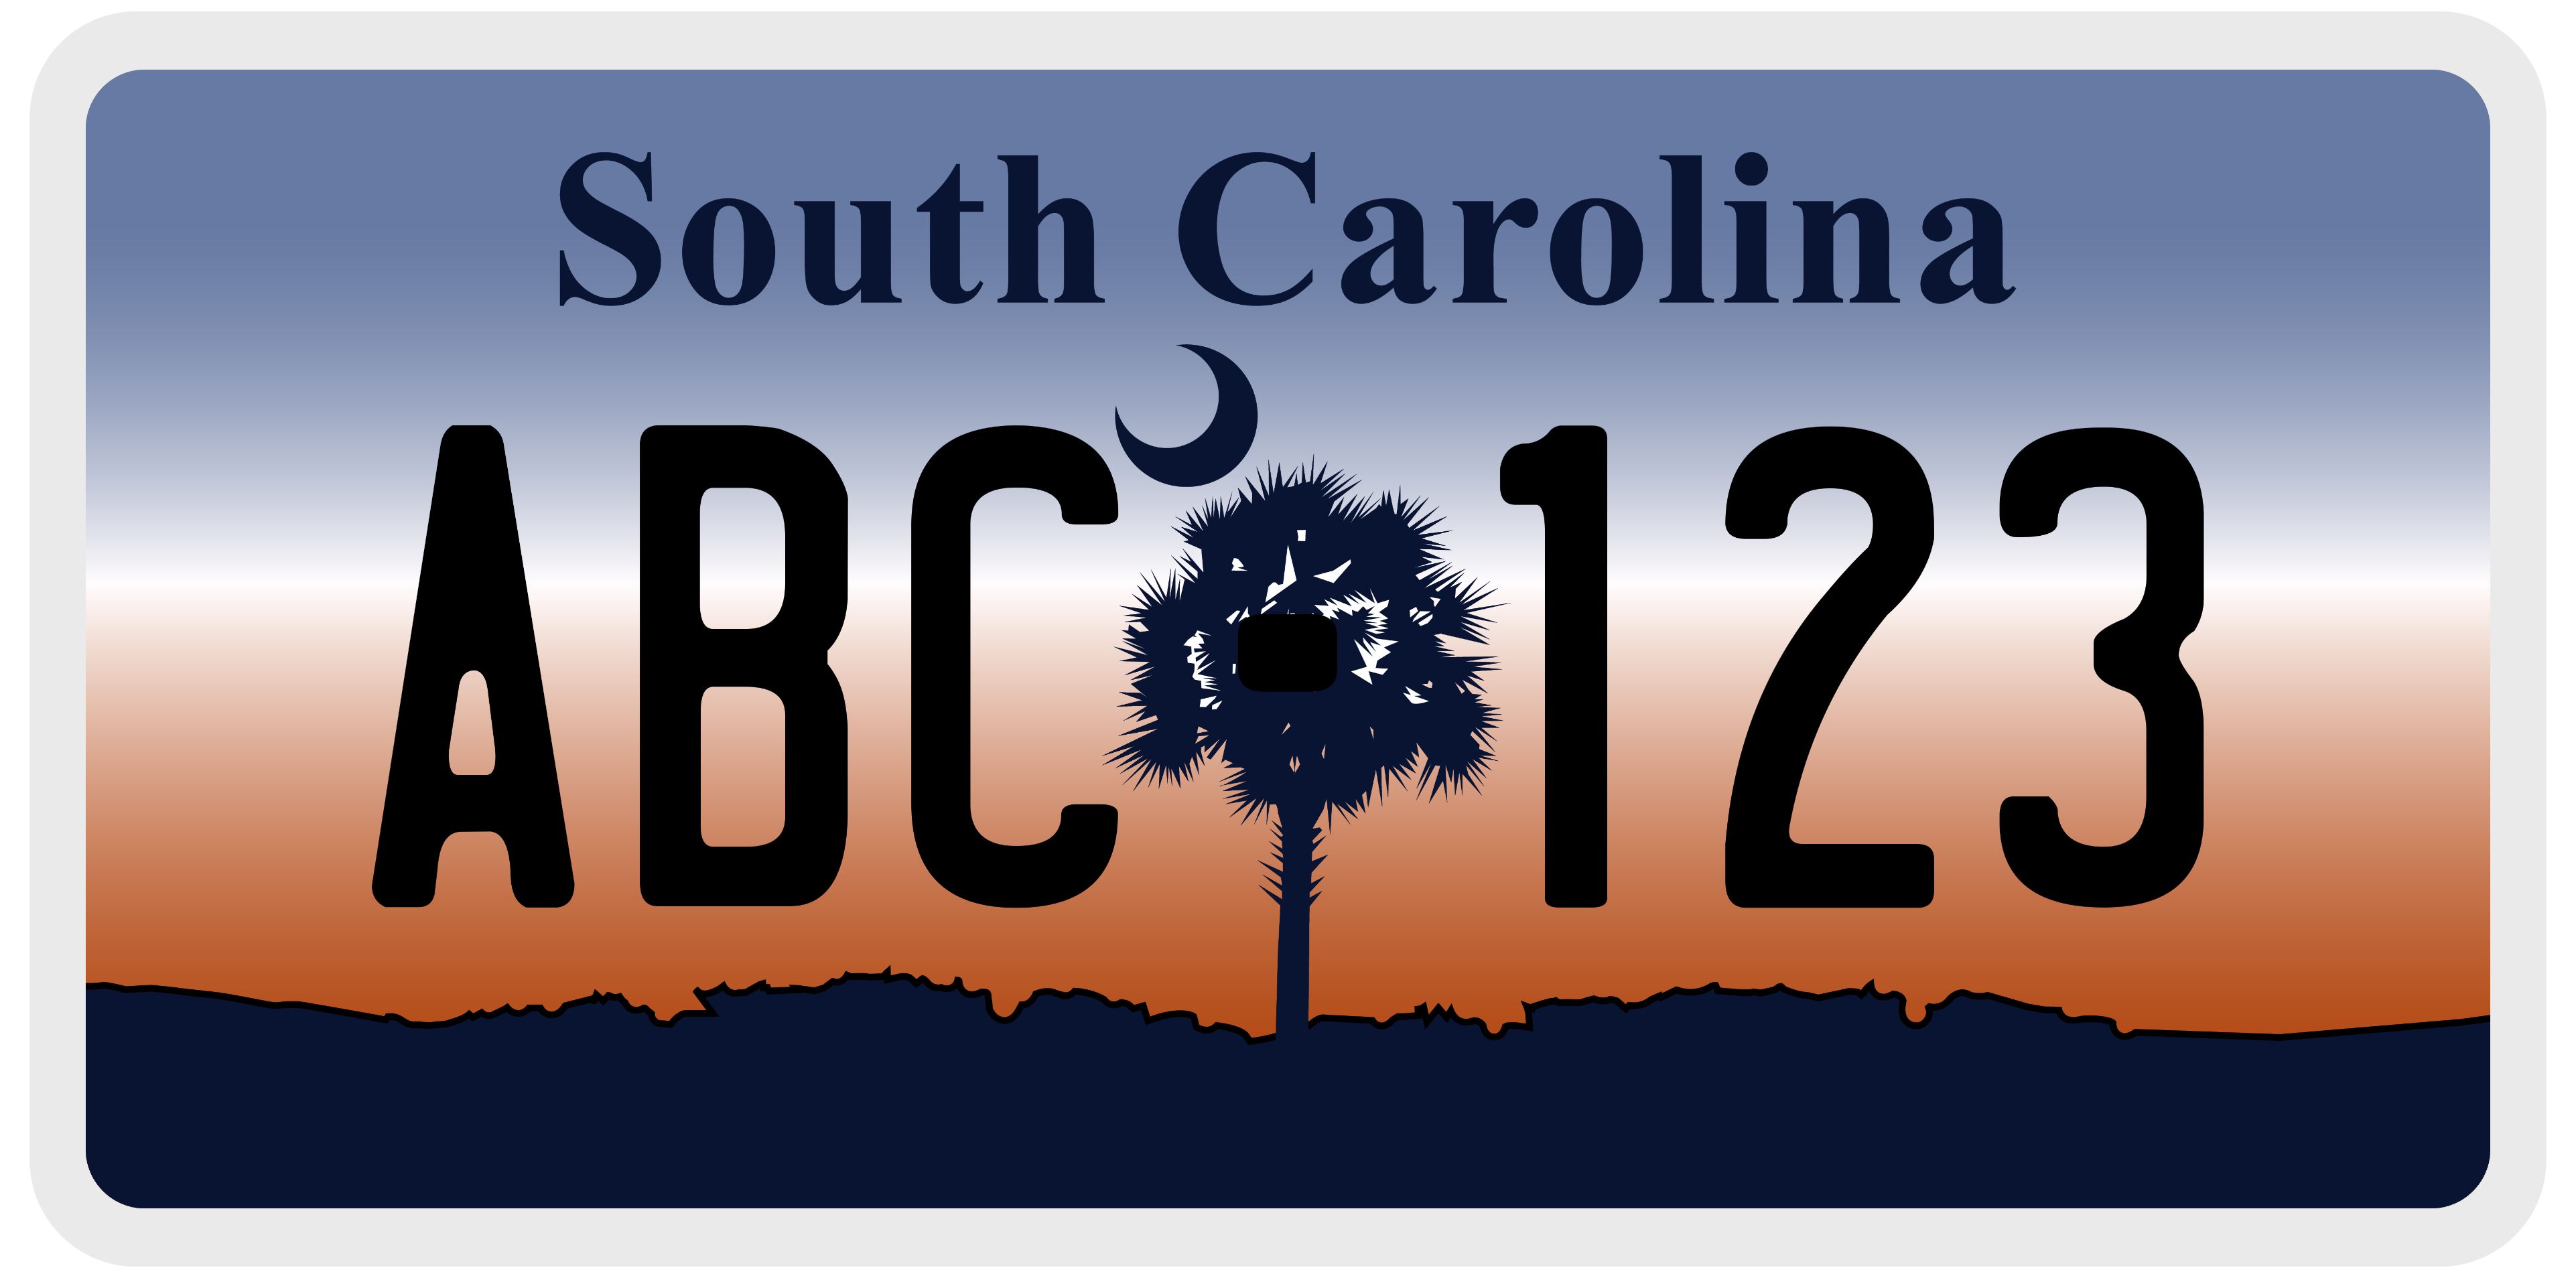 What does a standard South Carolina License Plate look like?